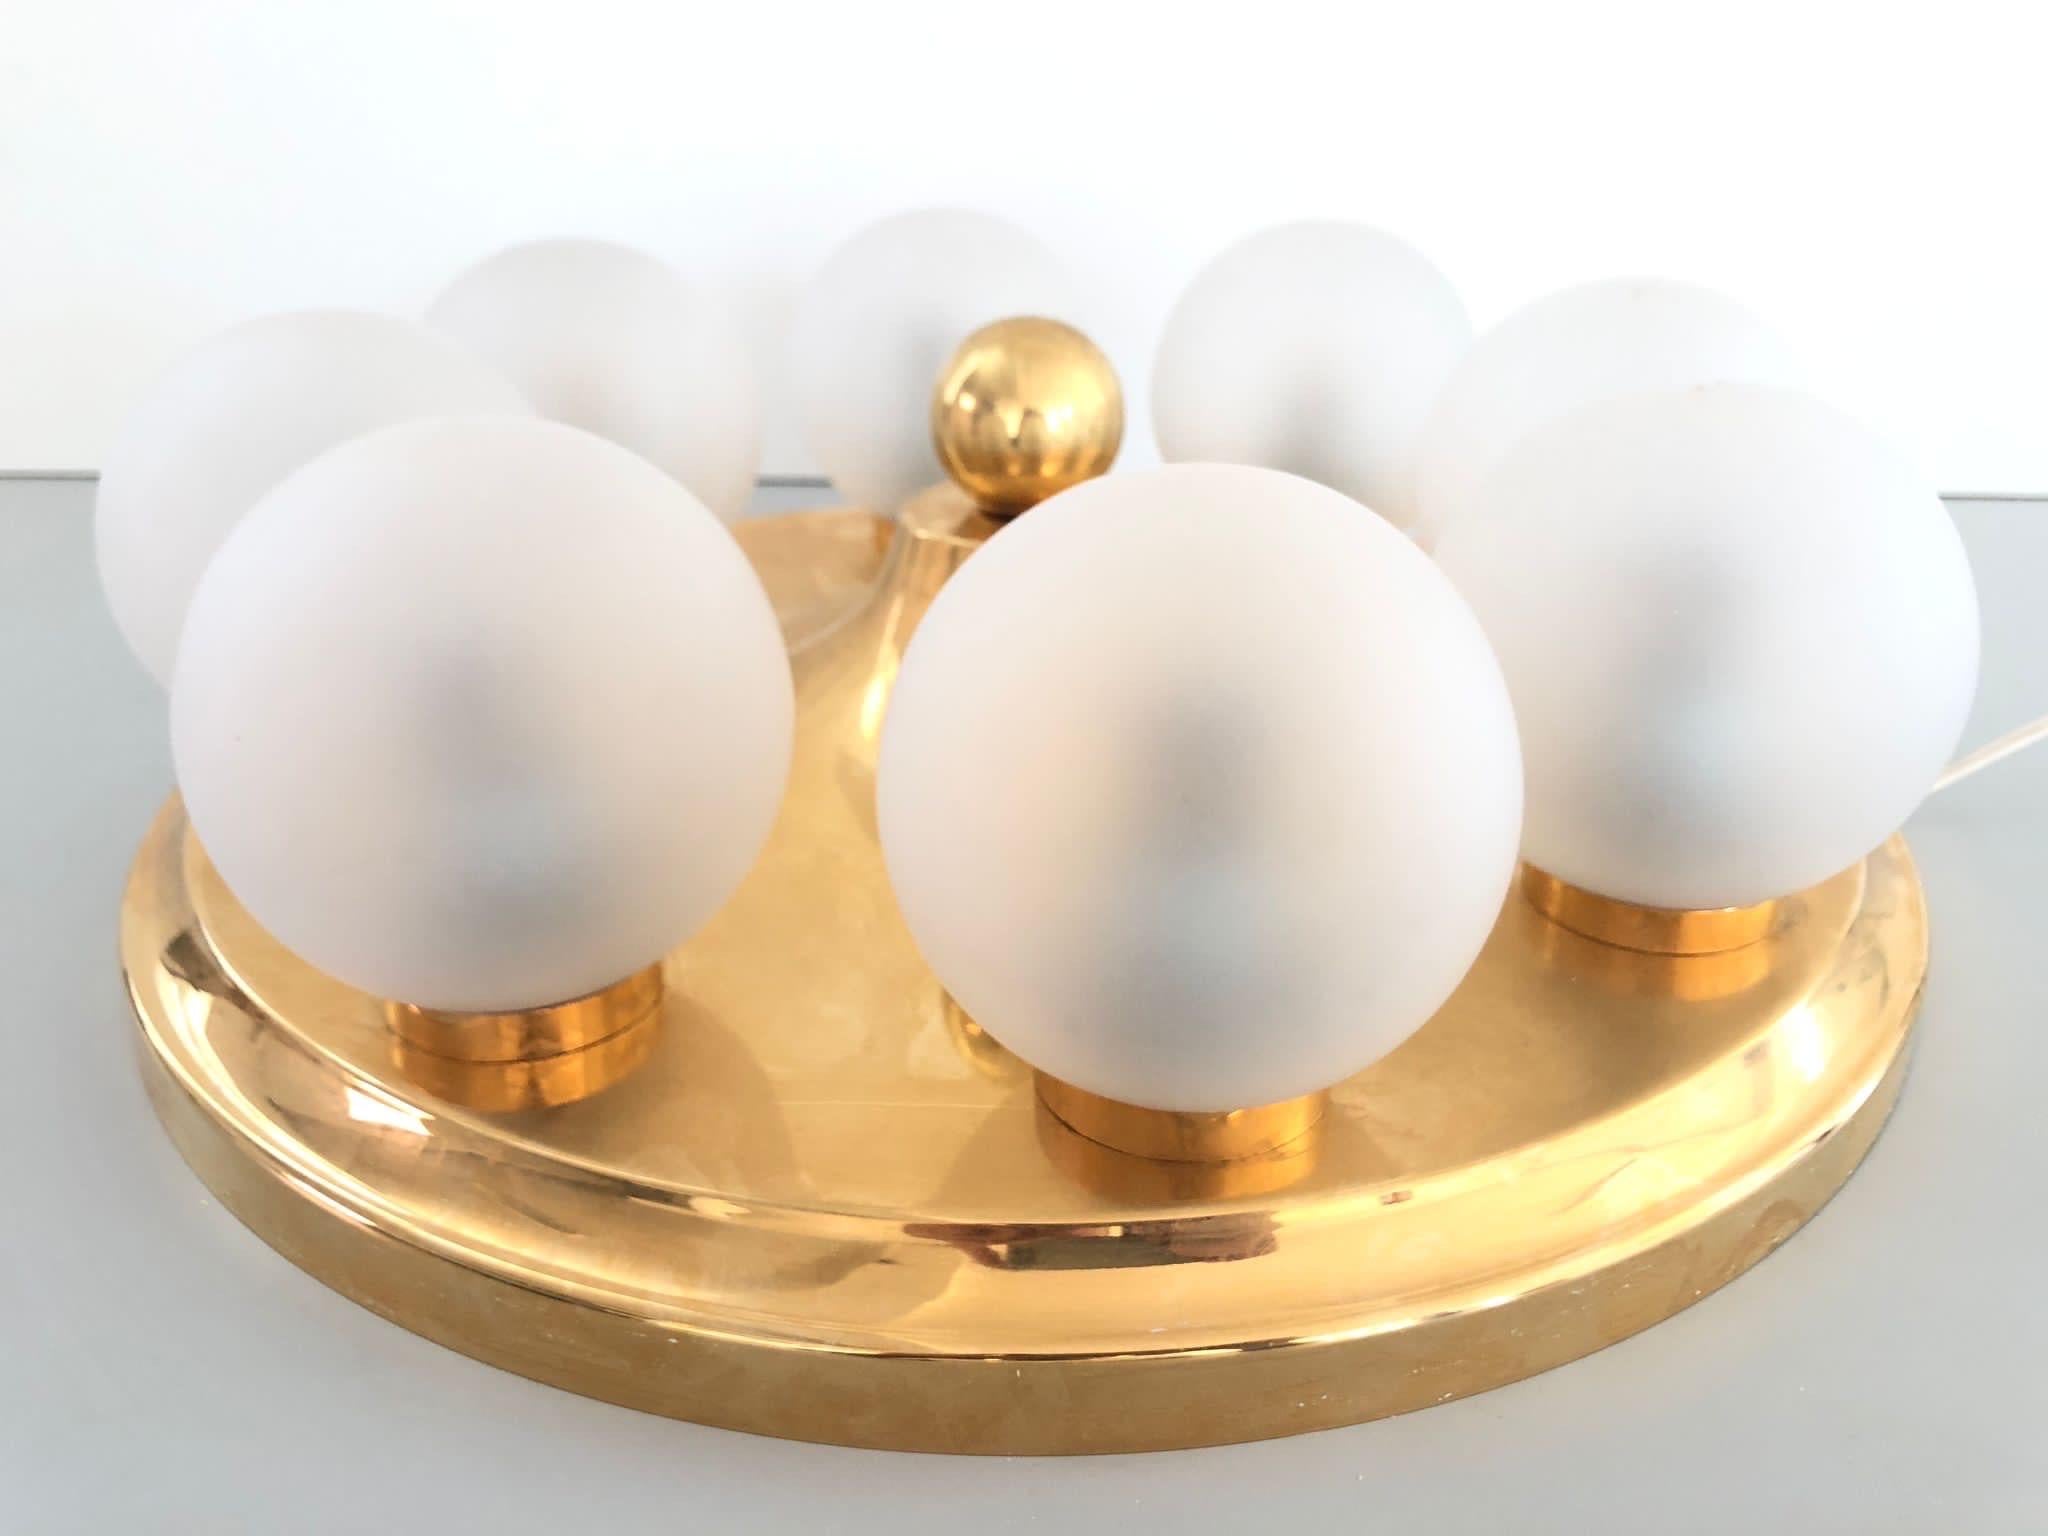 Late 20th Century Atomic Age Gold Metal and 8 Ball Flush Mount Light by Kinkeldey, 1970s, Germany For Sale